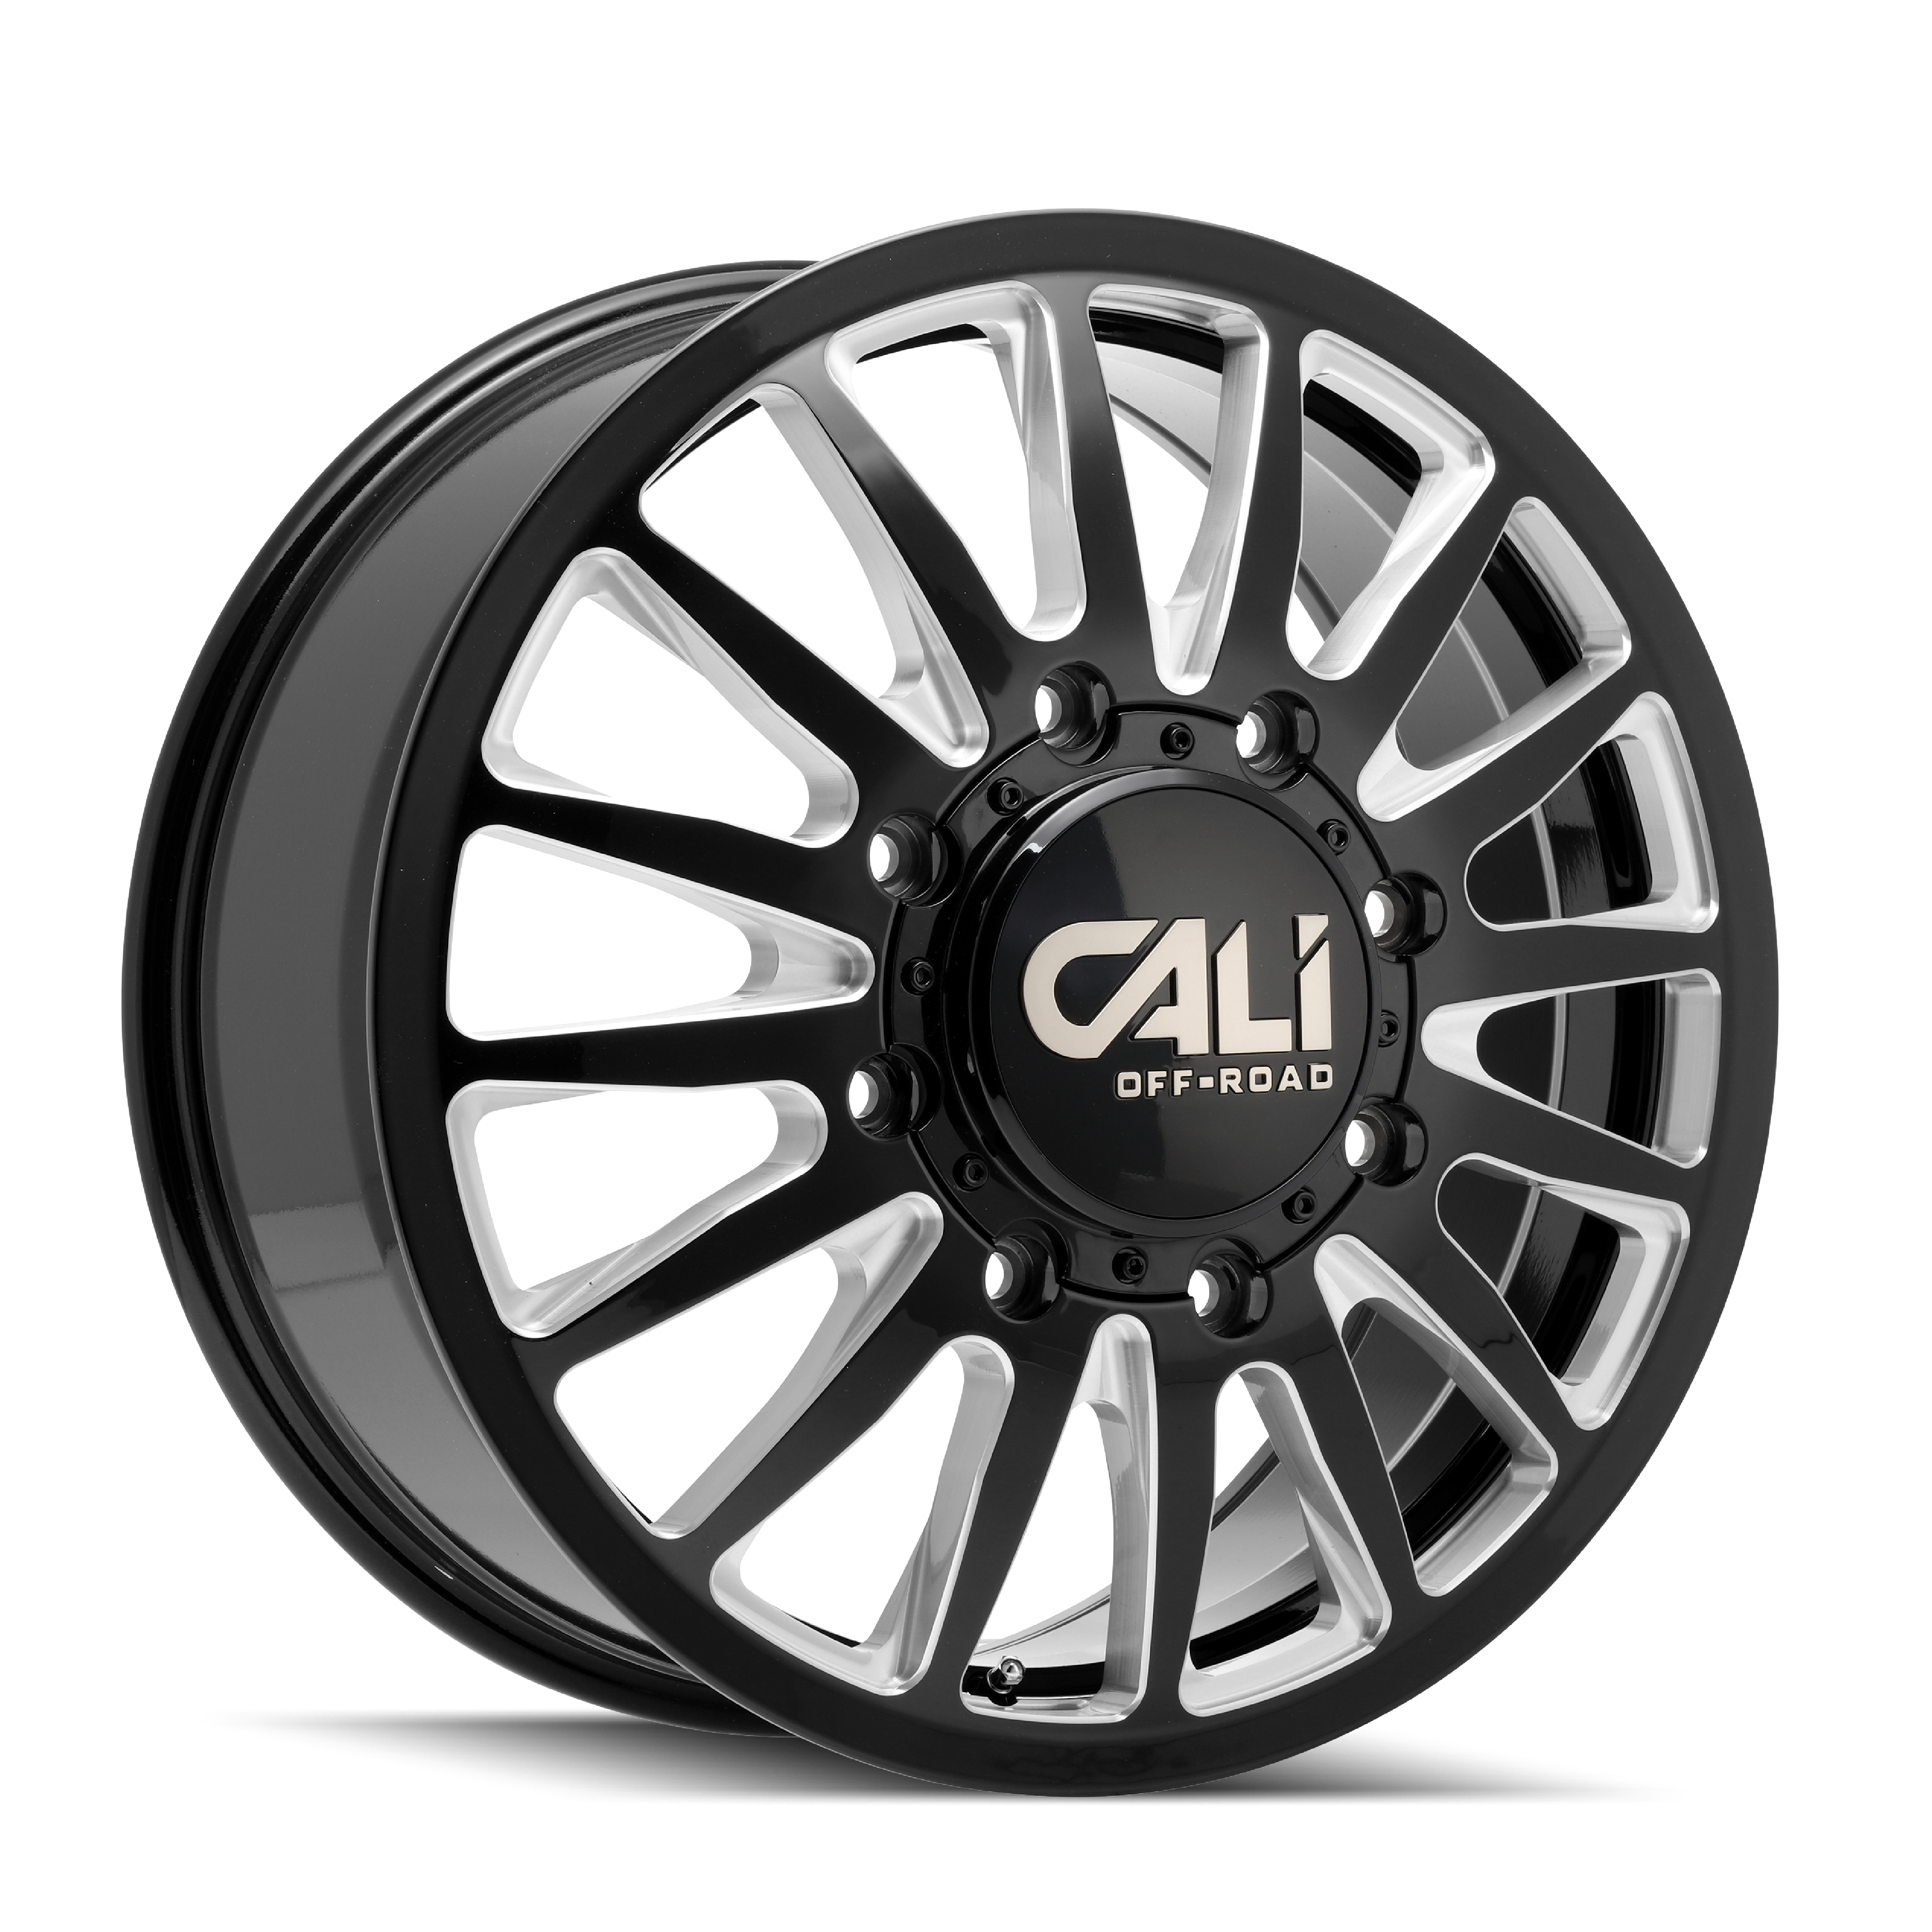 CALI OFF-ROAD SUMMIT DUALLY GLOSS BLACK MILLED (9110) FRONT